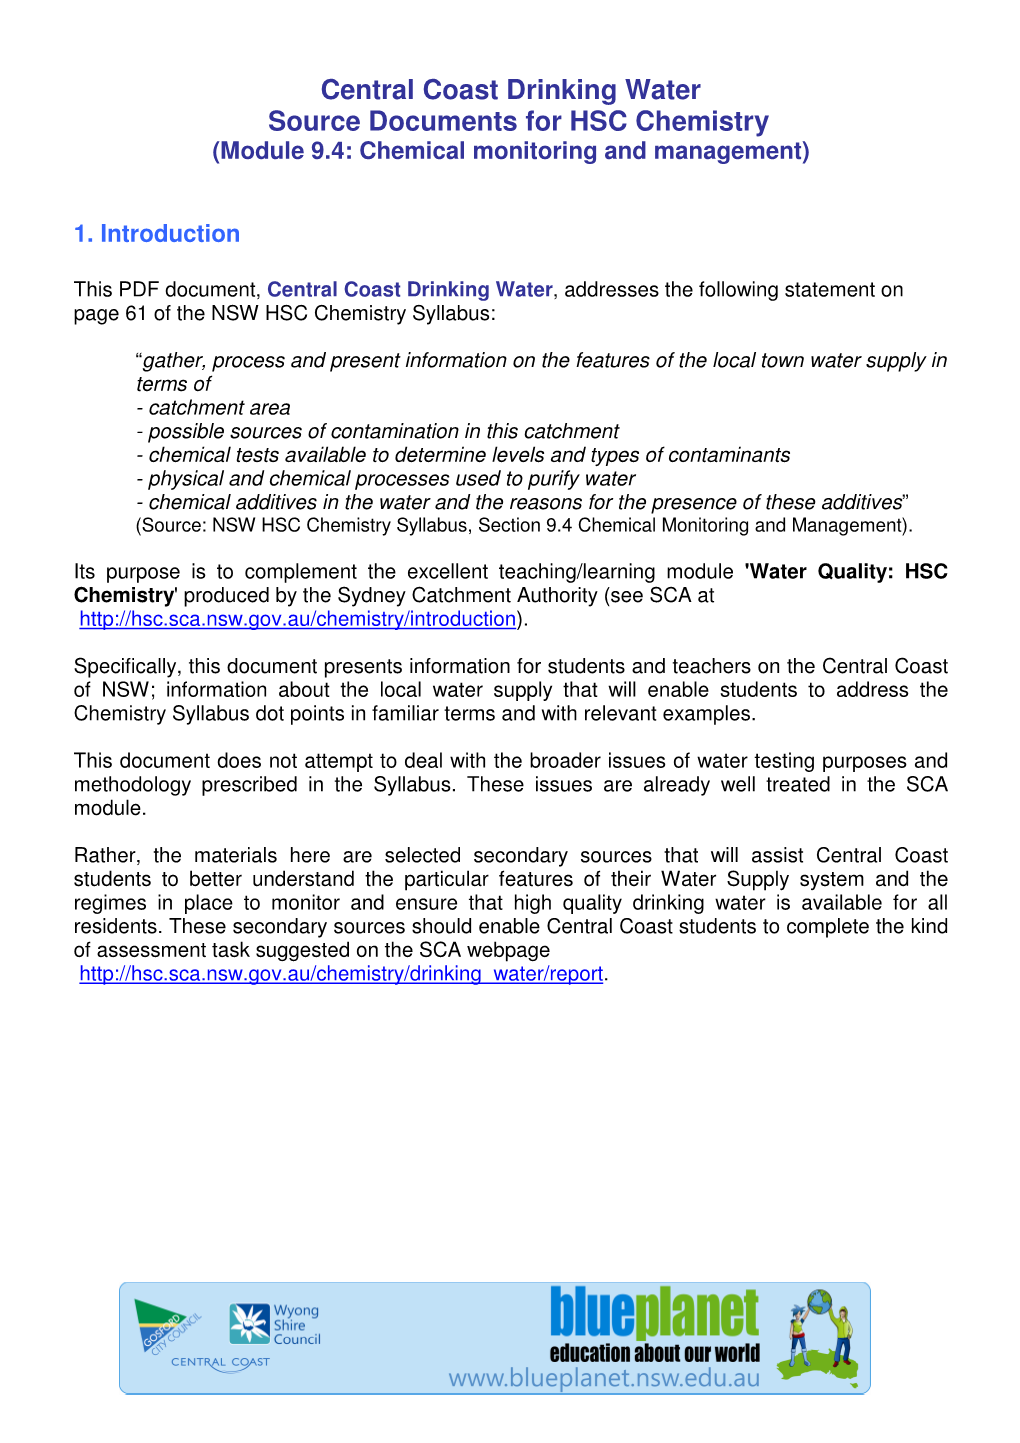 Central Coast Drinking Water Source Documents for HSC Chemistry (Module 9.4: Chemical Monitoring and Management)